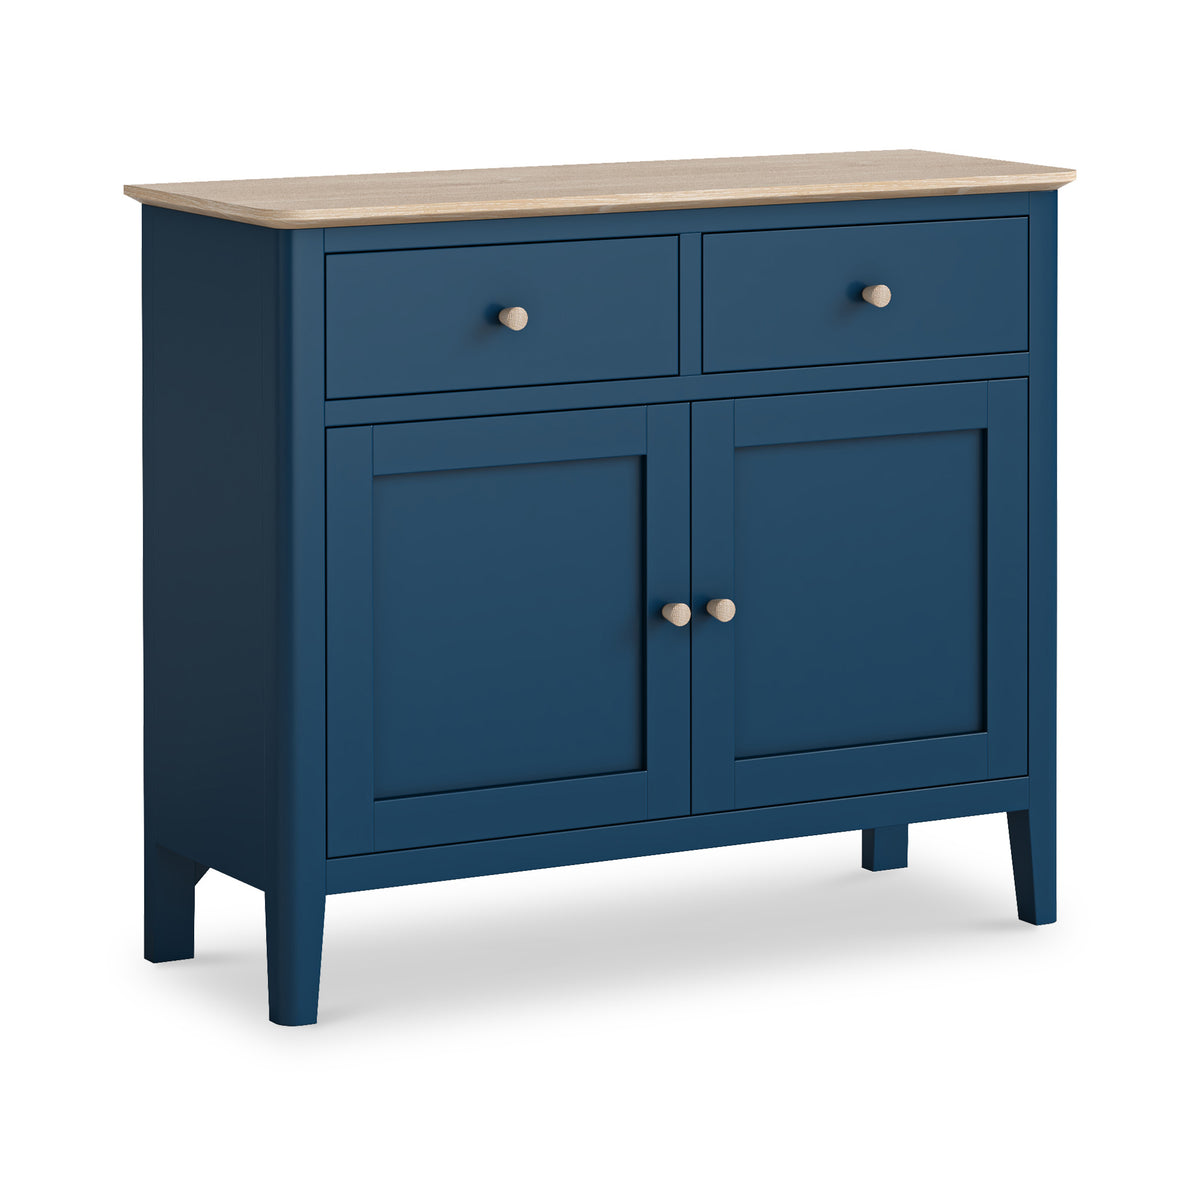 Penrose Navy Blue Small Sideboard Cabinet with wooden handles from Roseland Furniture